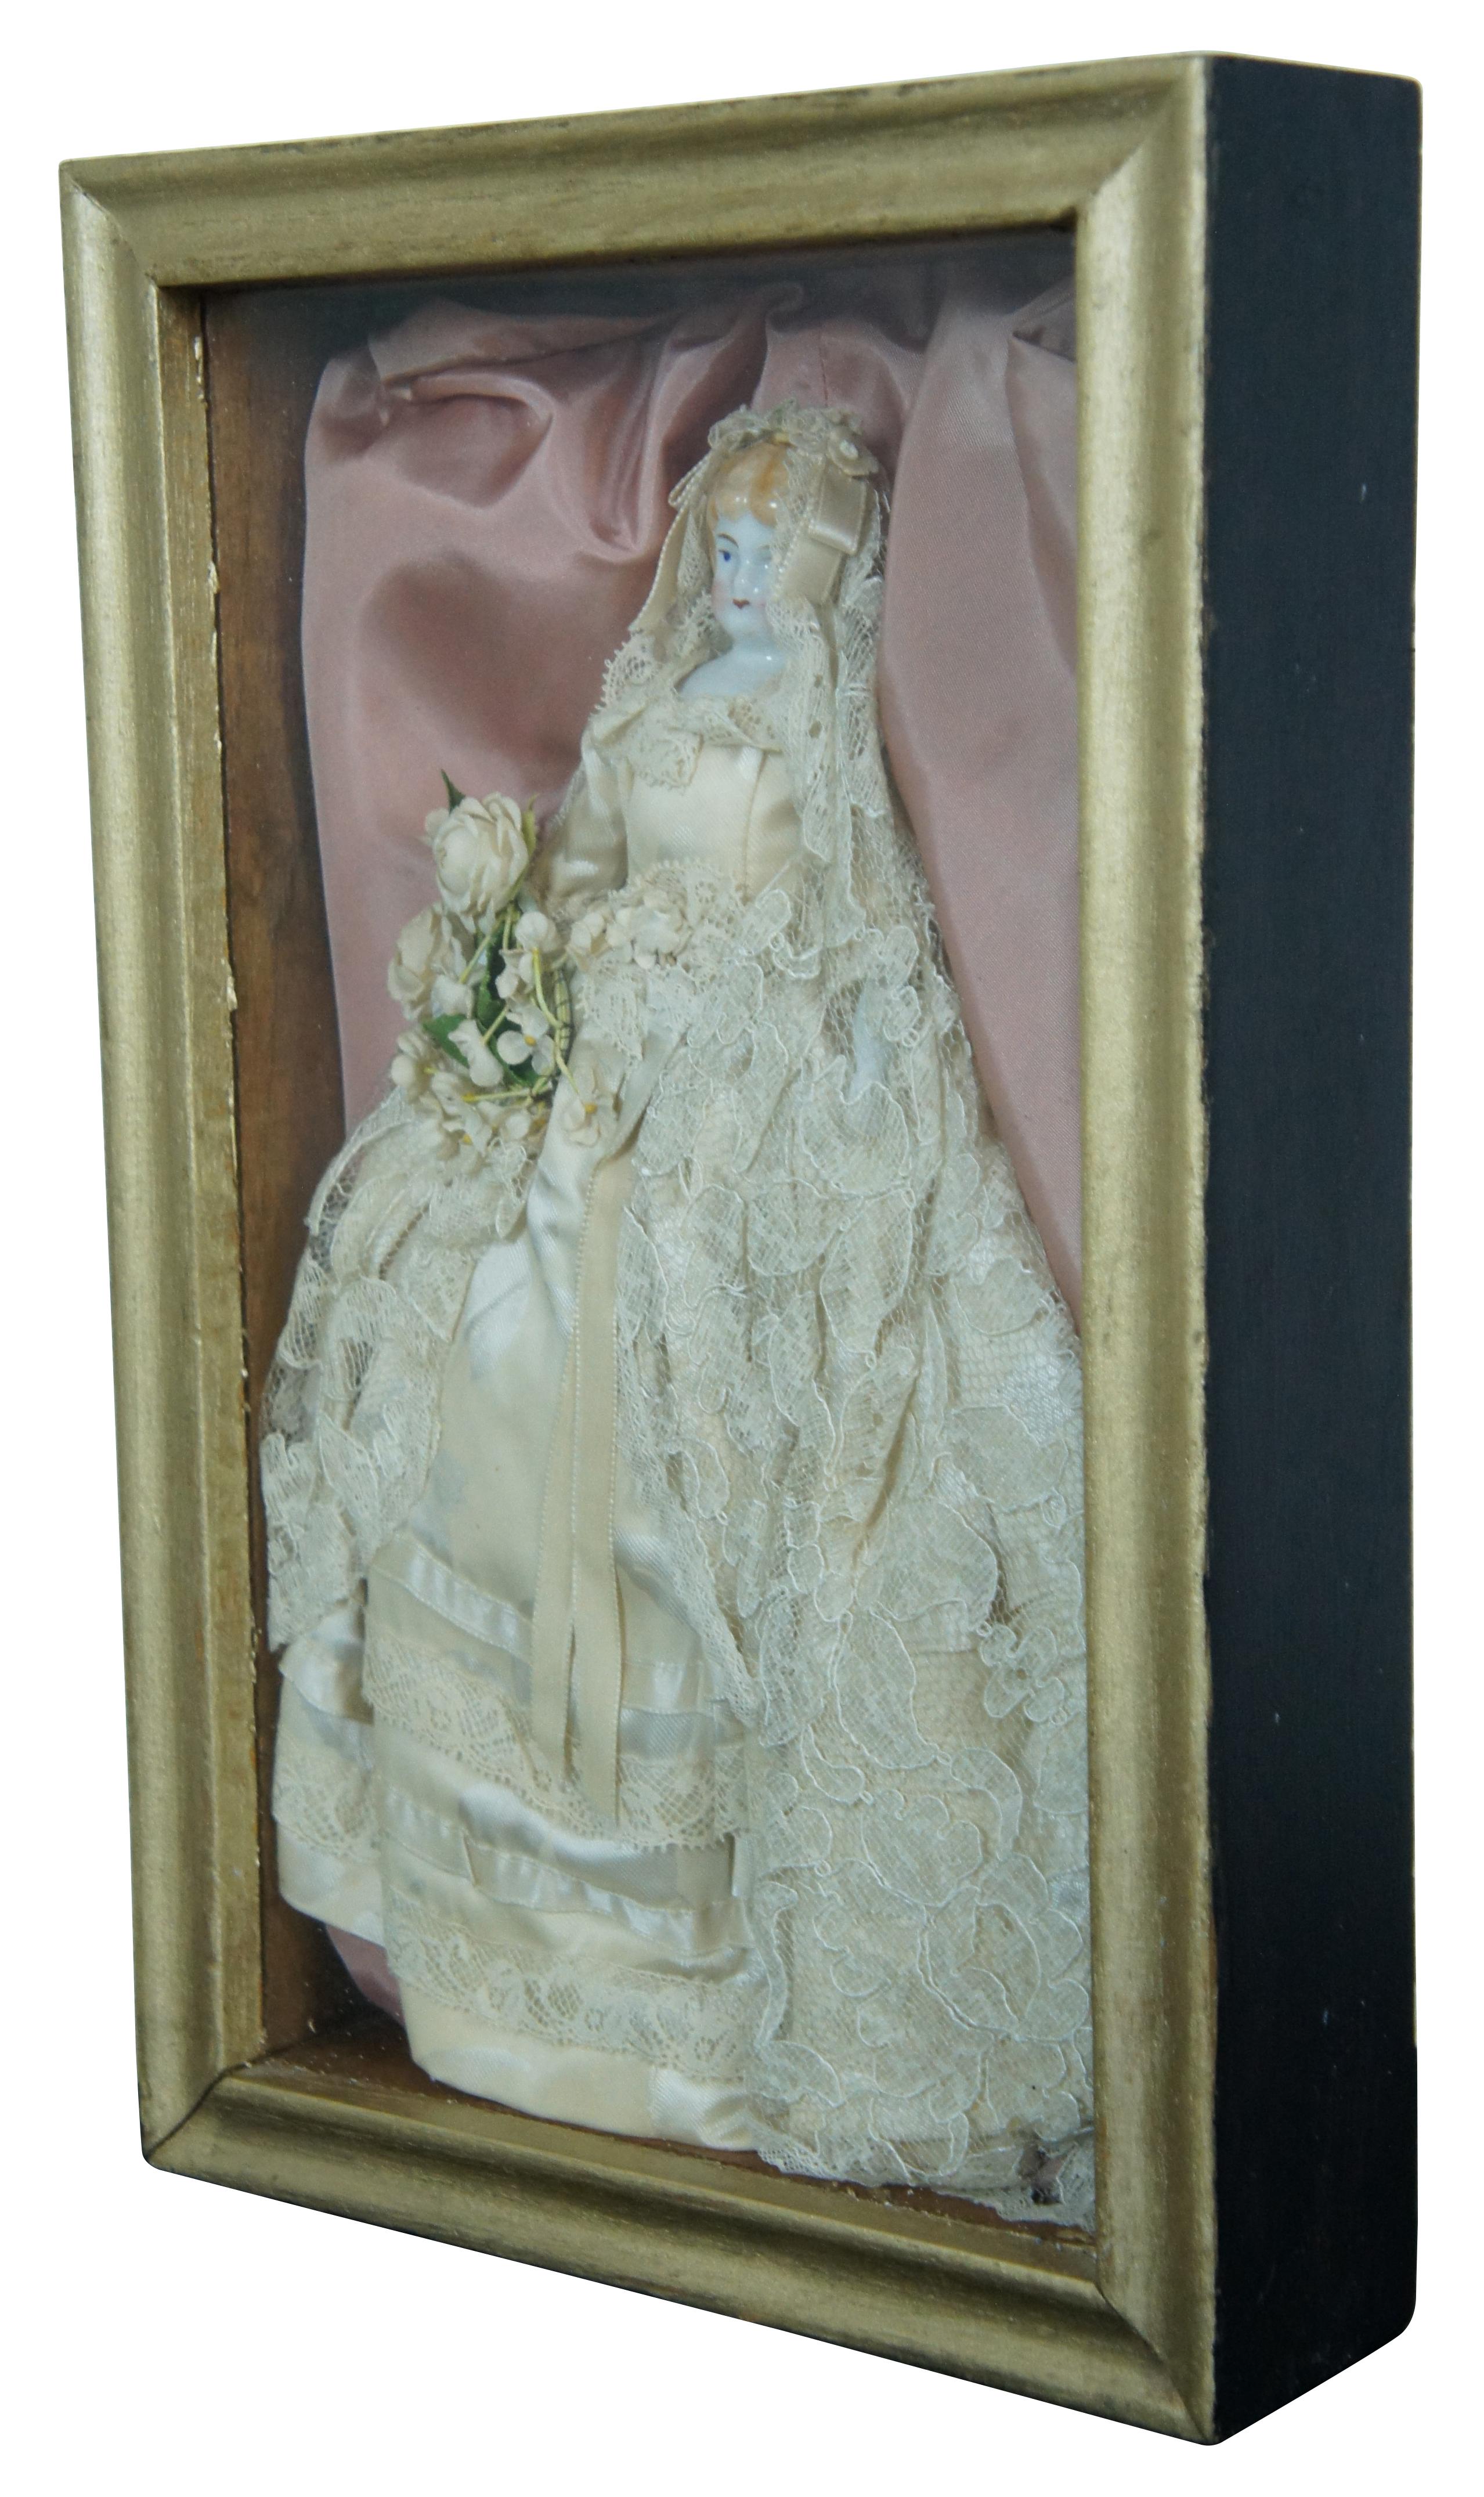 Antique mid 19th century molded head porcelain doll with blonde hair and blue eyes, dressed in a lovely floral wedding gown with lace over-skirt and bouquet of flowers, displayed in a pink padded shadowbox with gilded frame.
 